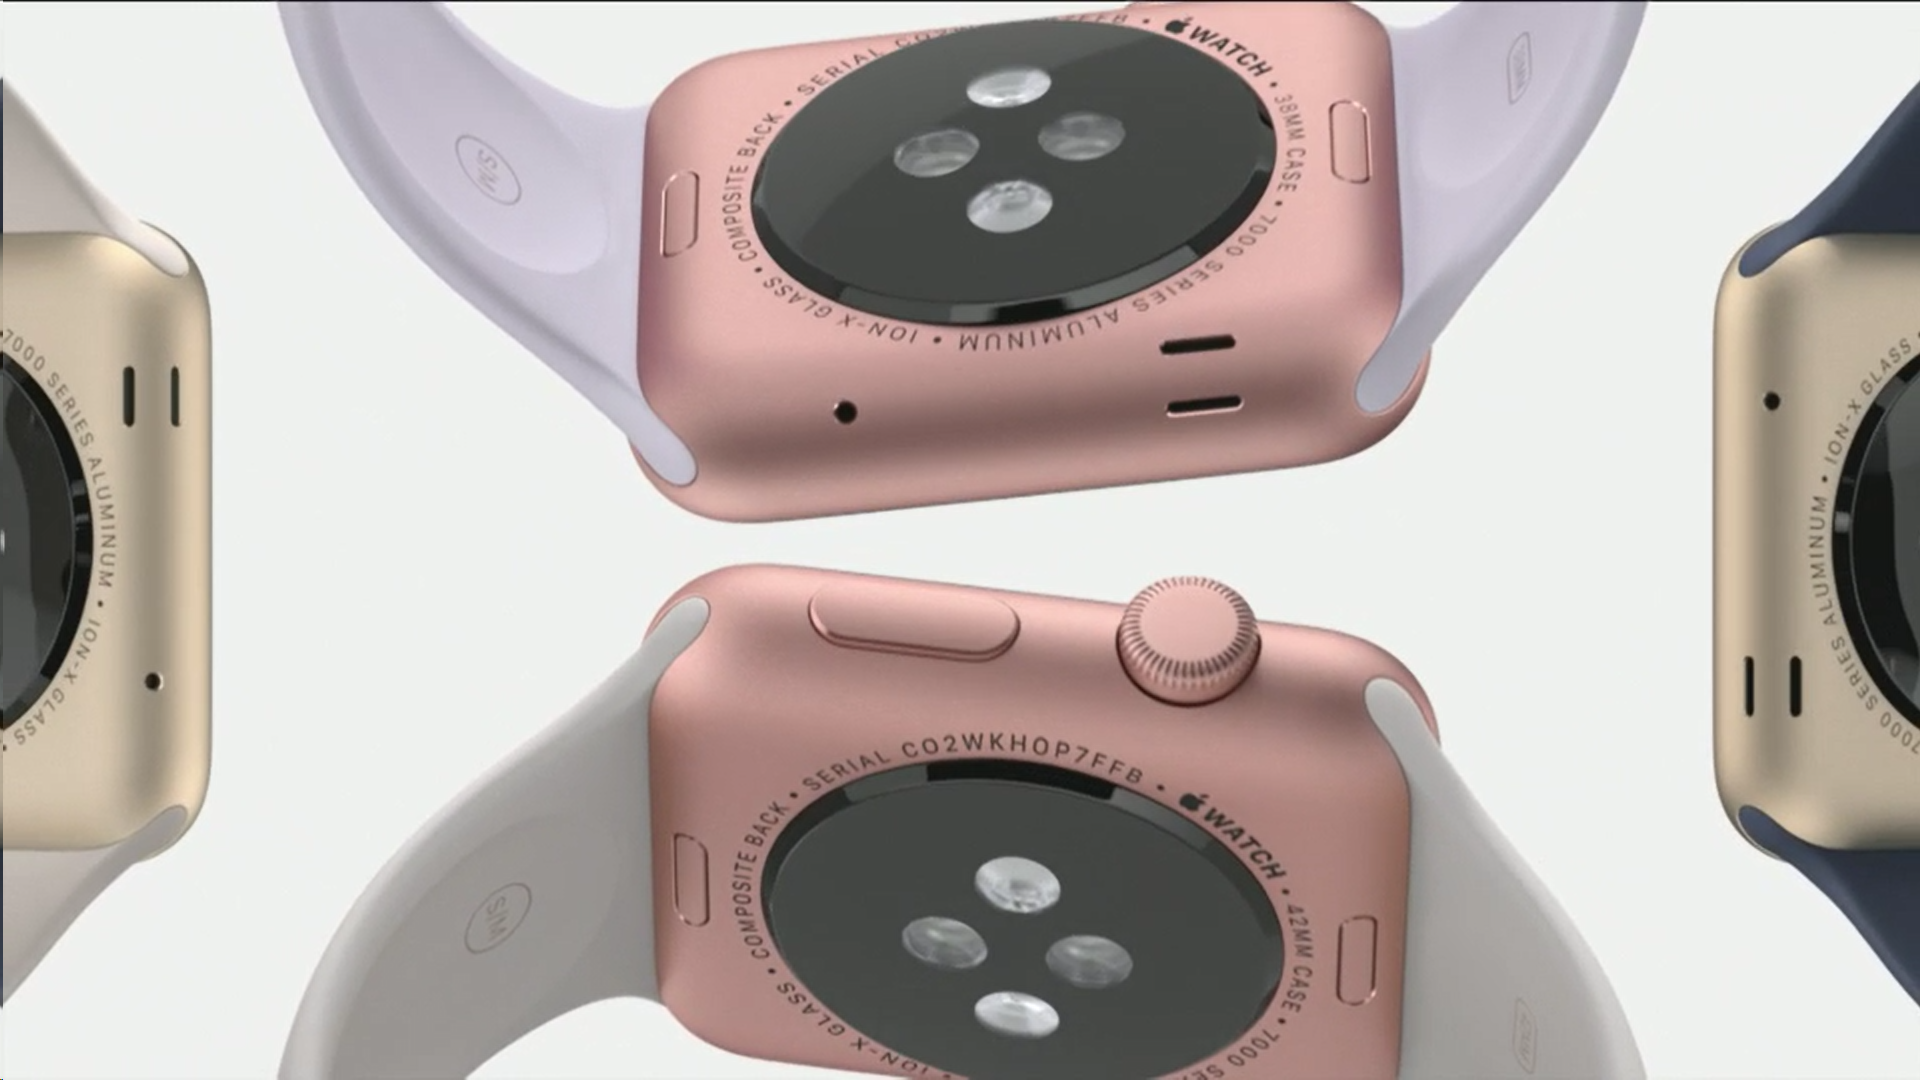 new apple watch models available today apple watch os 2 coming 16 september image 1